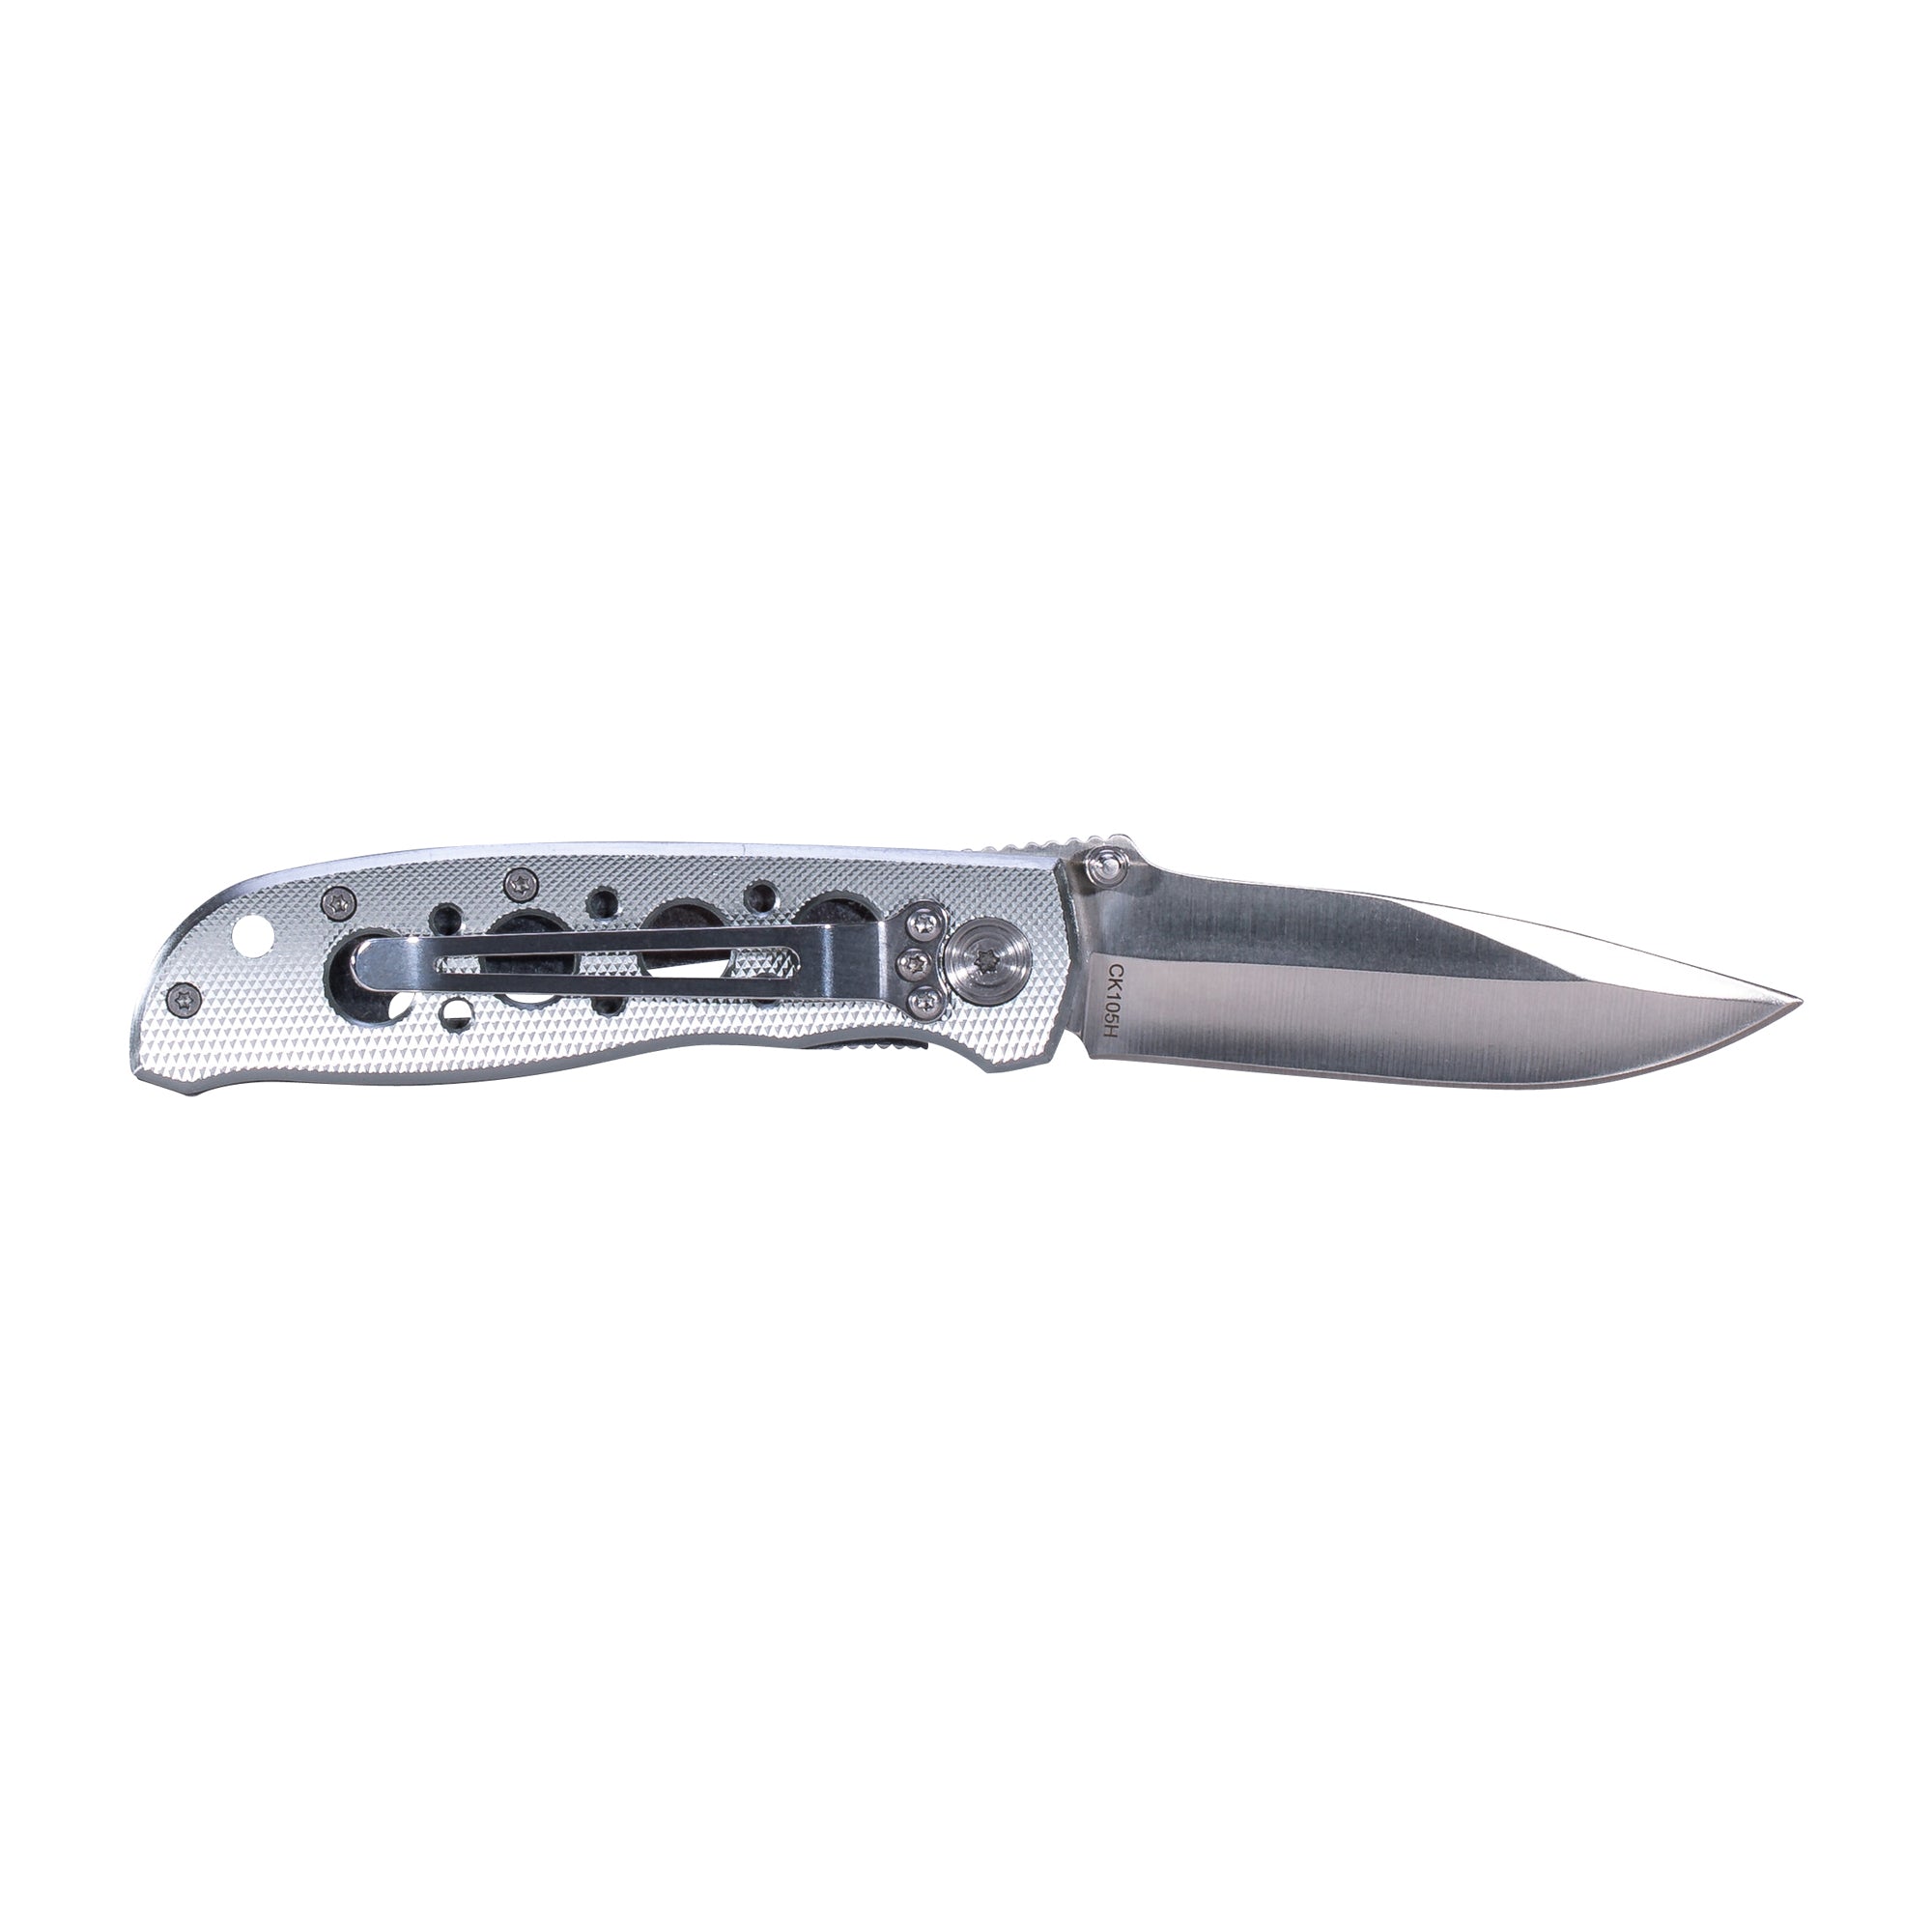 Smith & Wesson Messer Extreme Ops silber